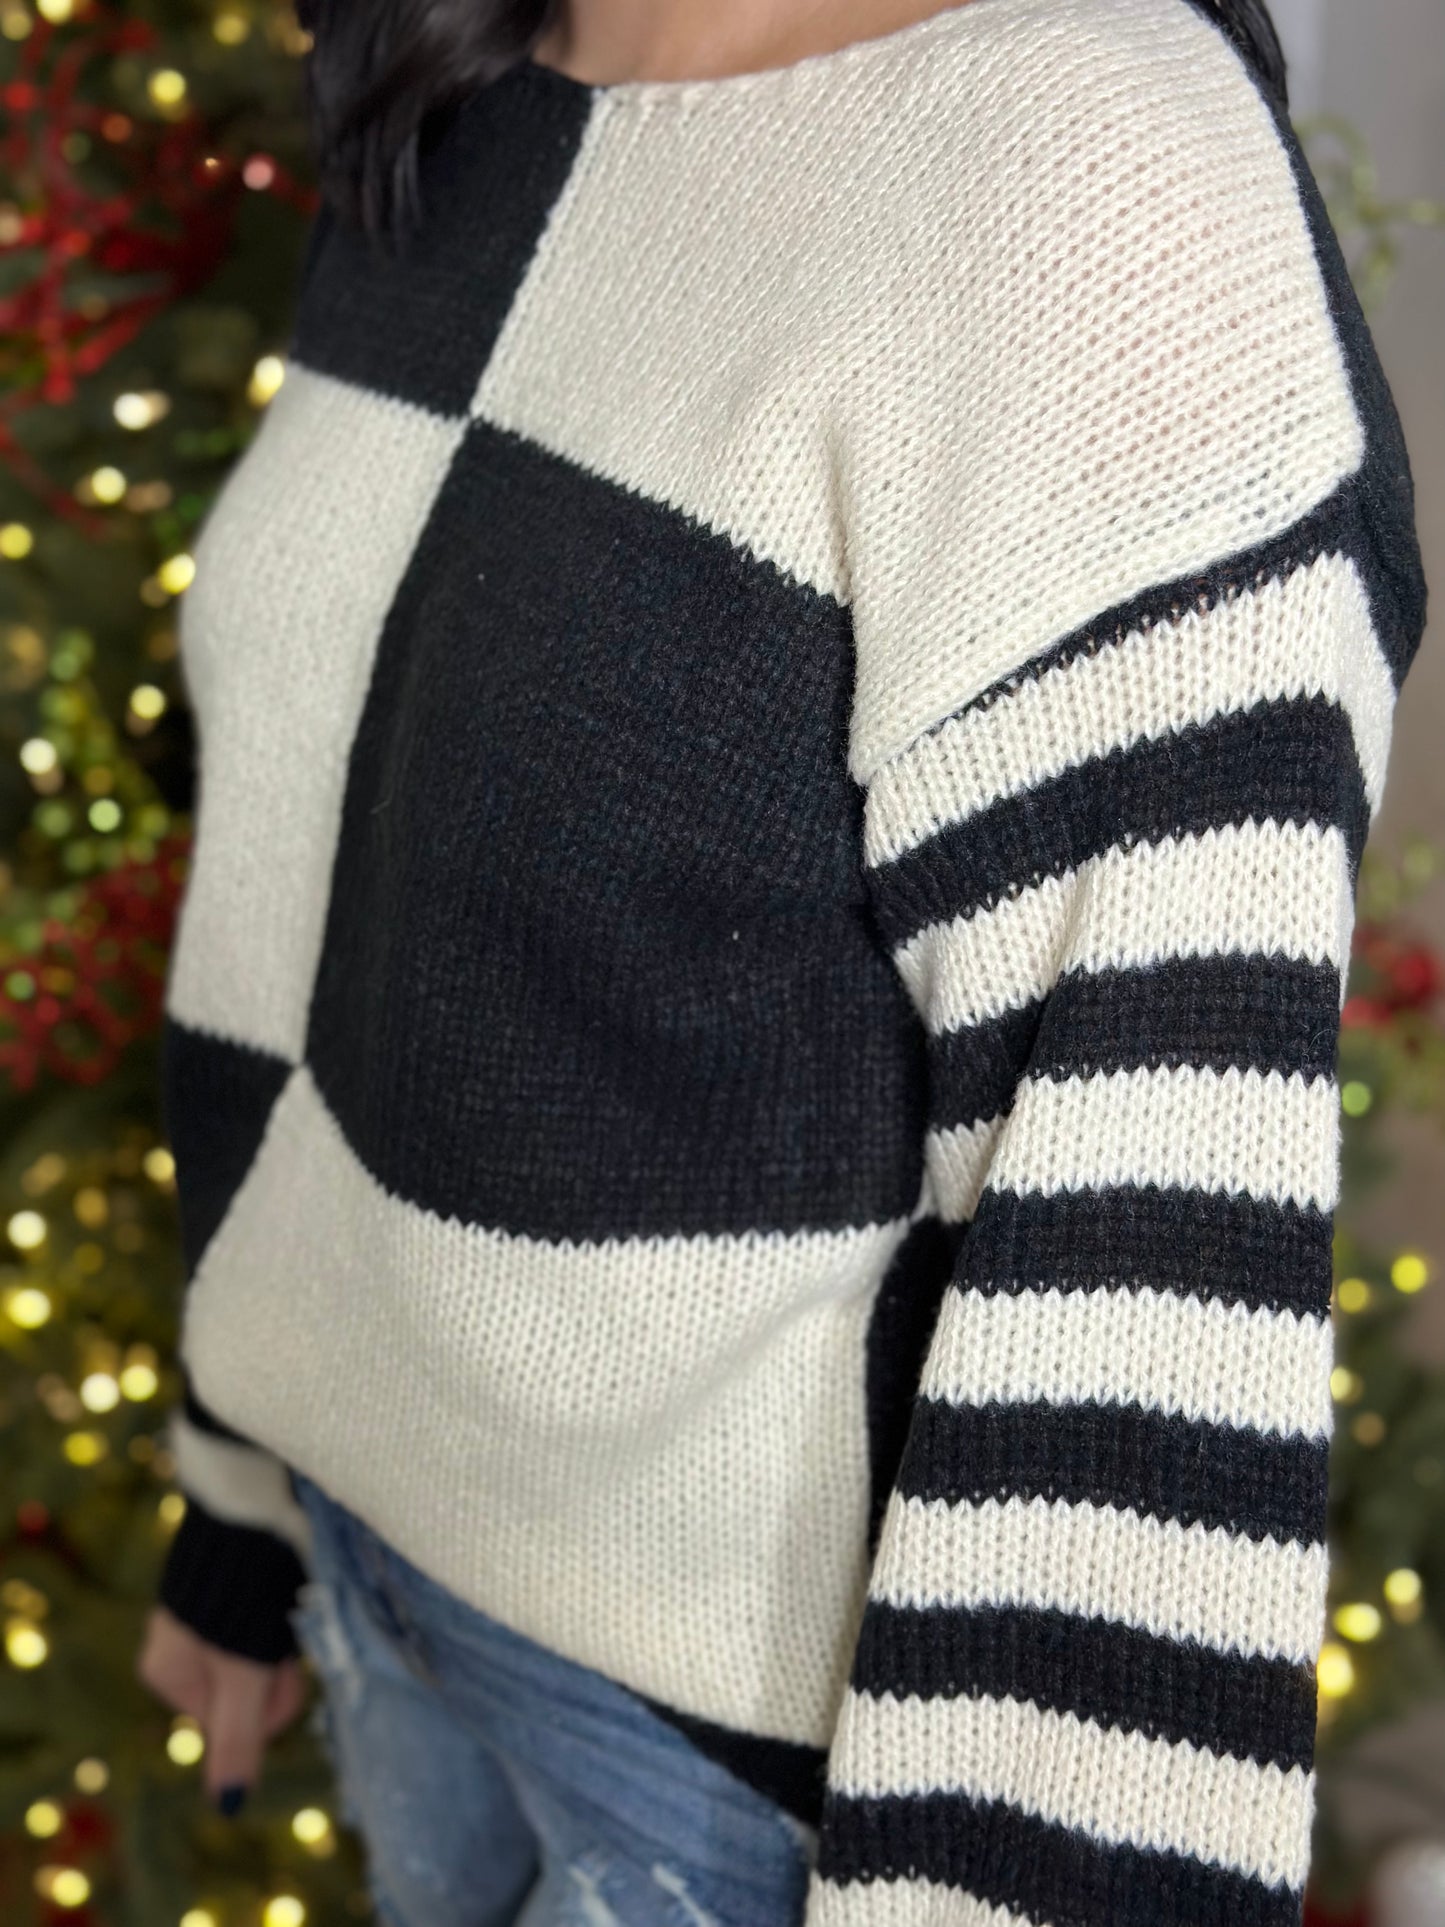 The Mix It Up Sweater